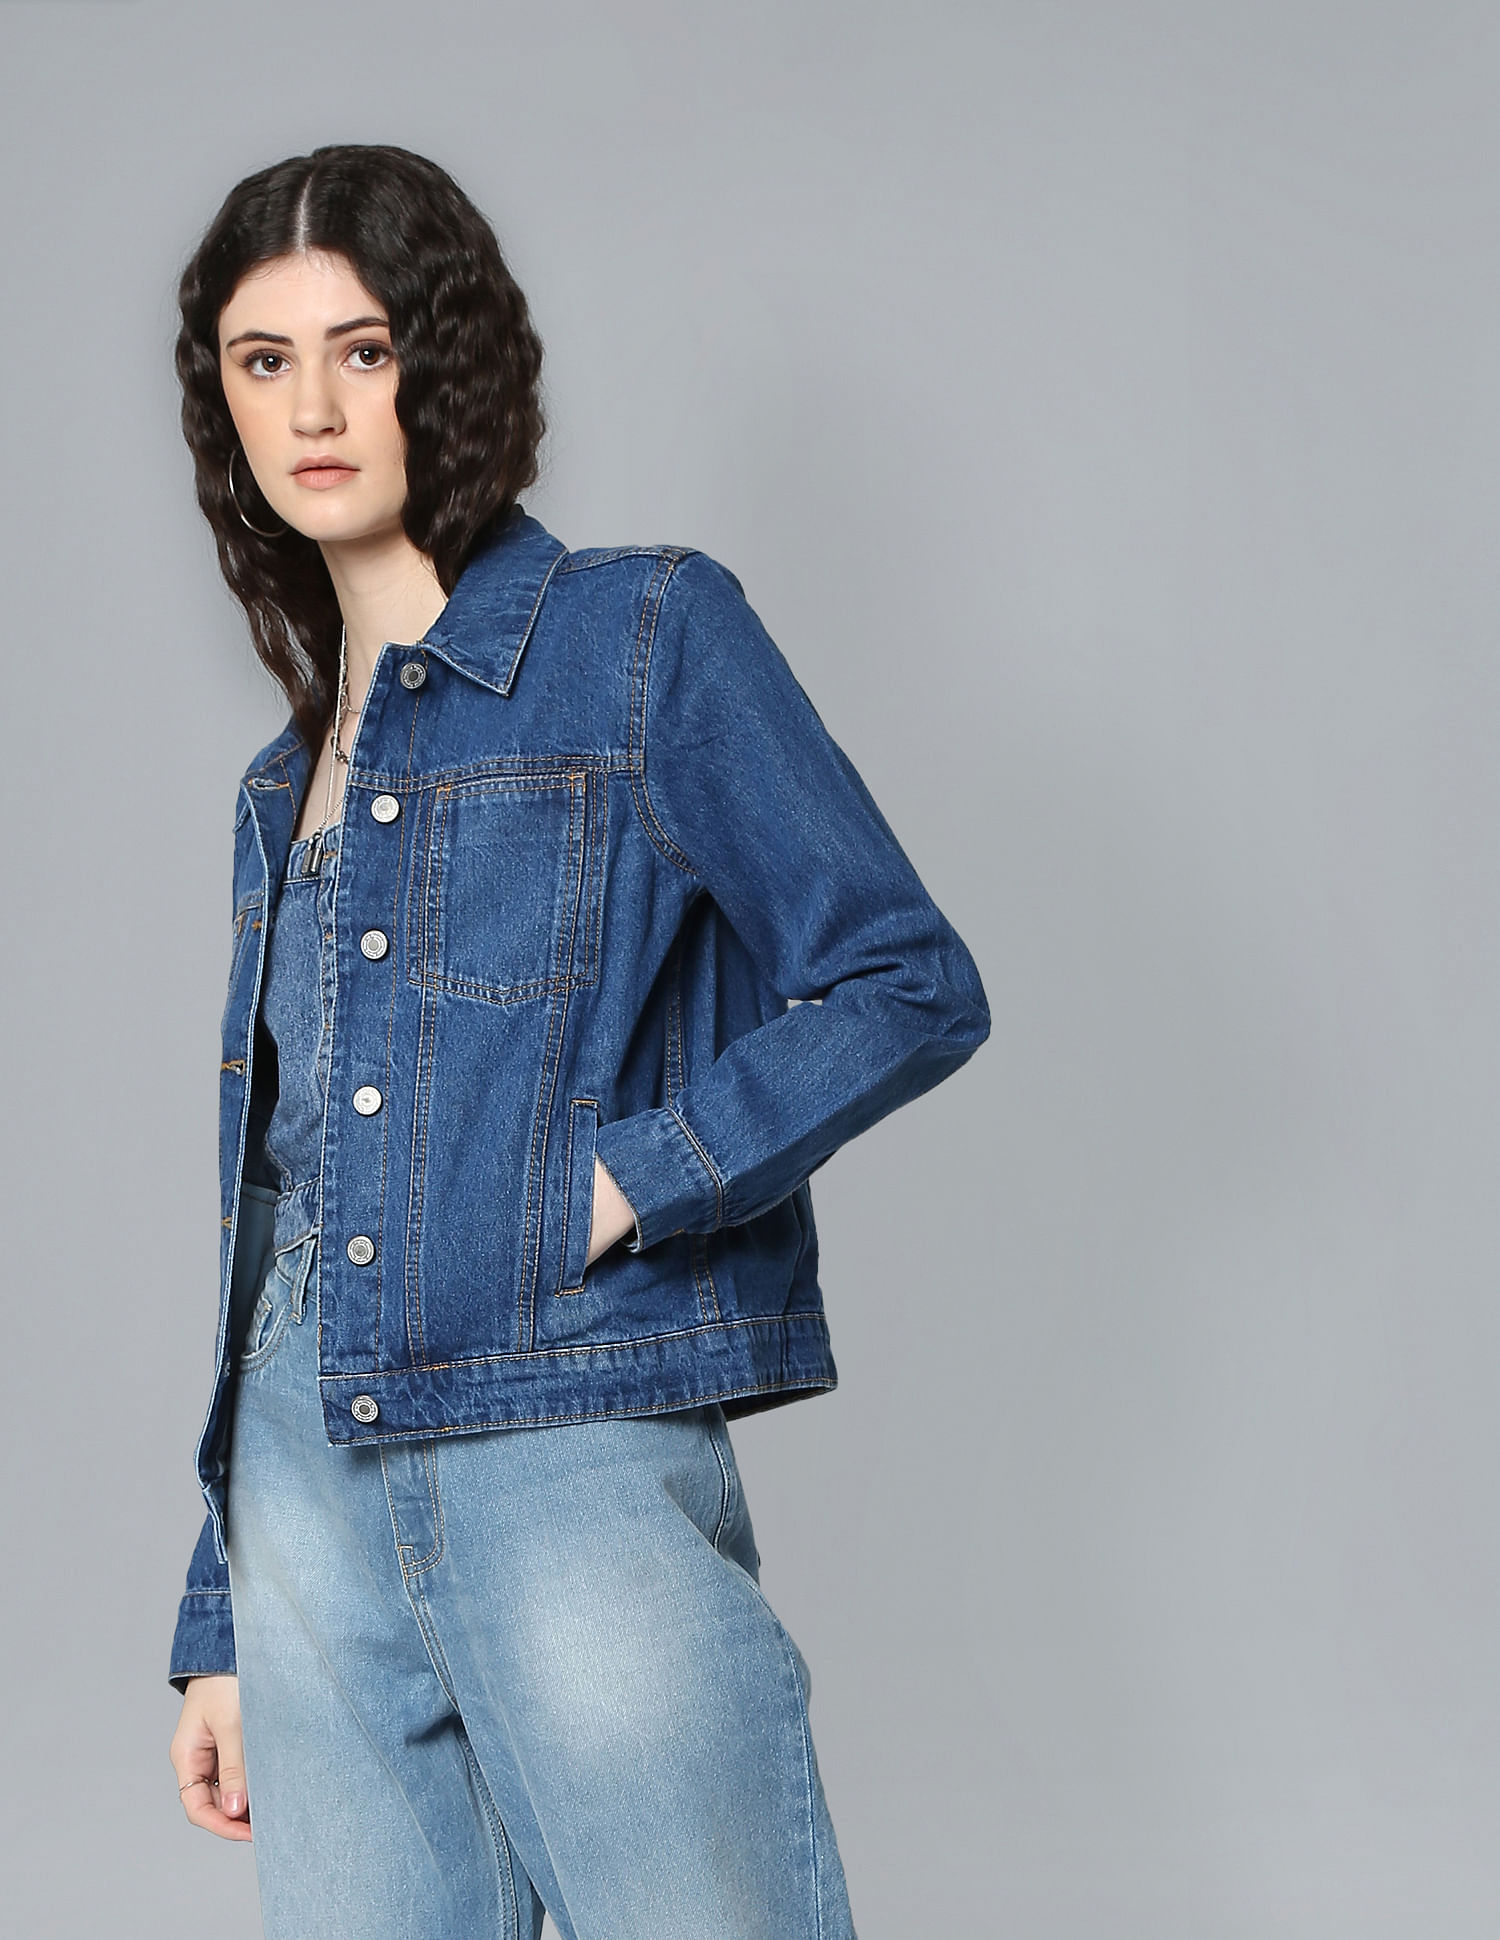 Campus Sutra Pink Denim Jacket - Buy Campus Sutra Pink Denim Jacket Online  at Best Prices in India on Snapdeal